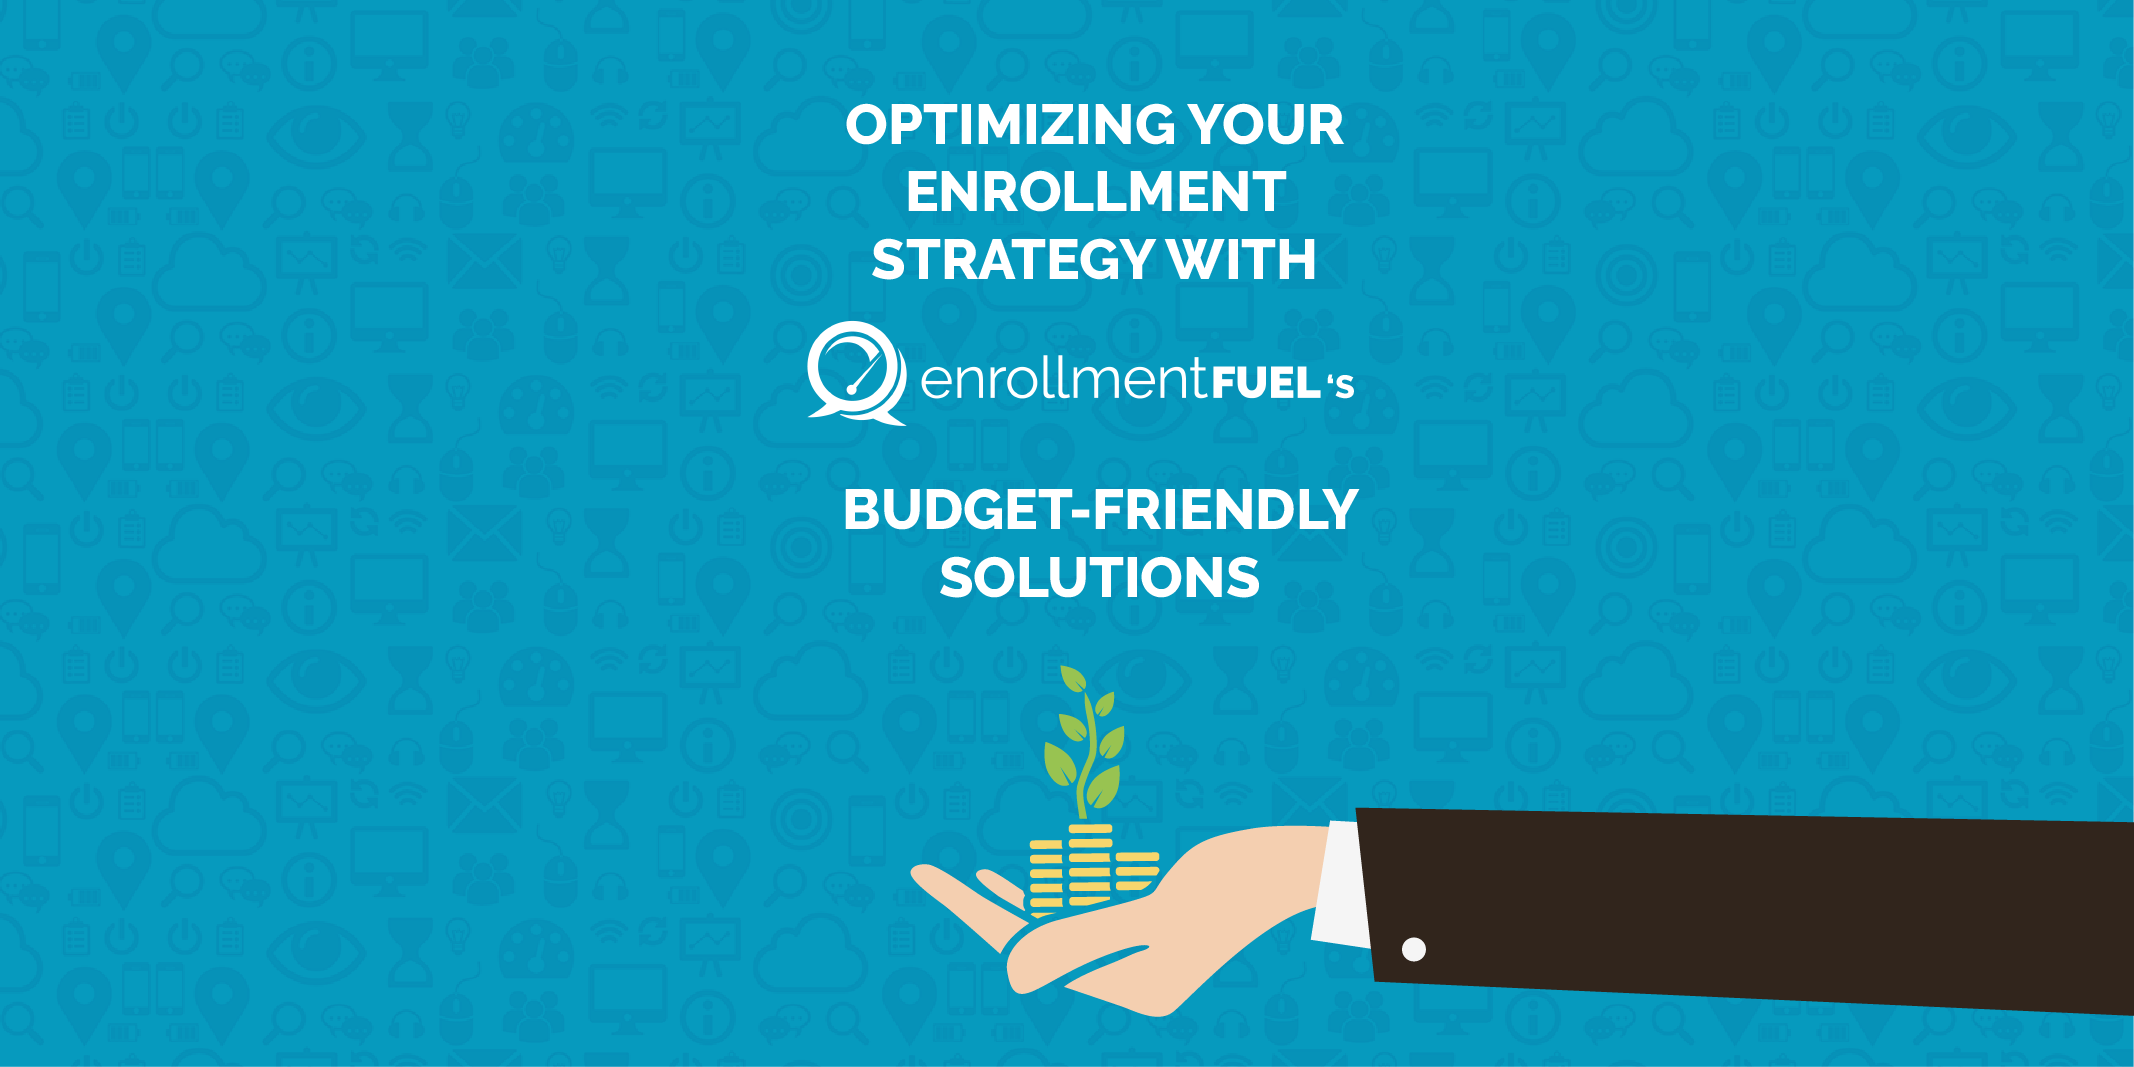 Optimizing Your Enrollment Strategy with enrollmentFUEL's Budget-Friendly Solutions